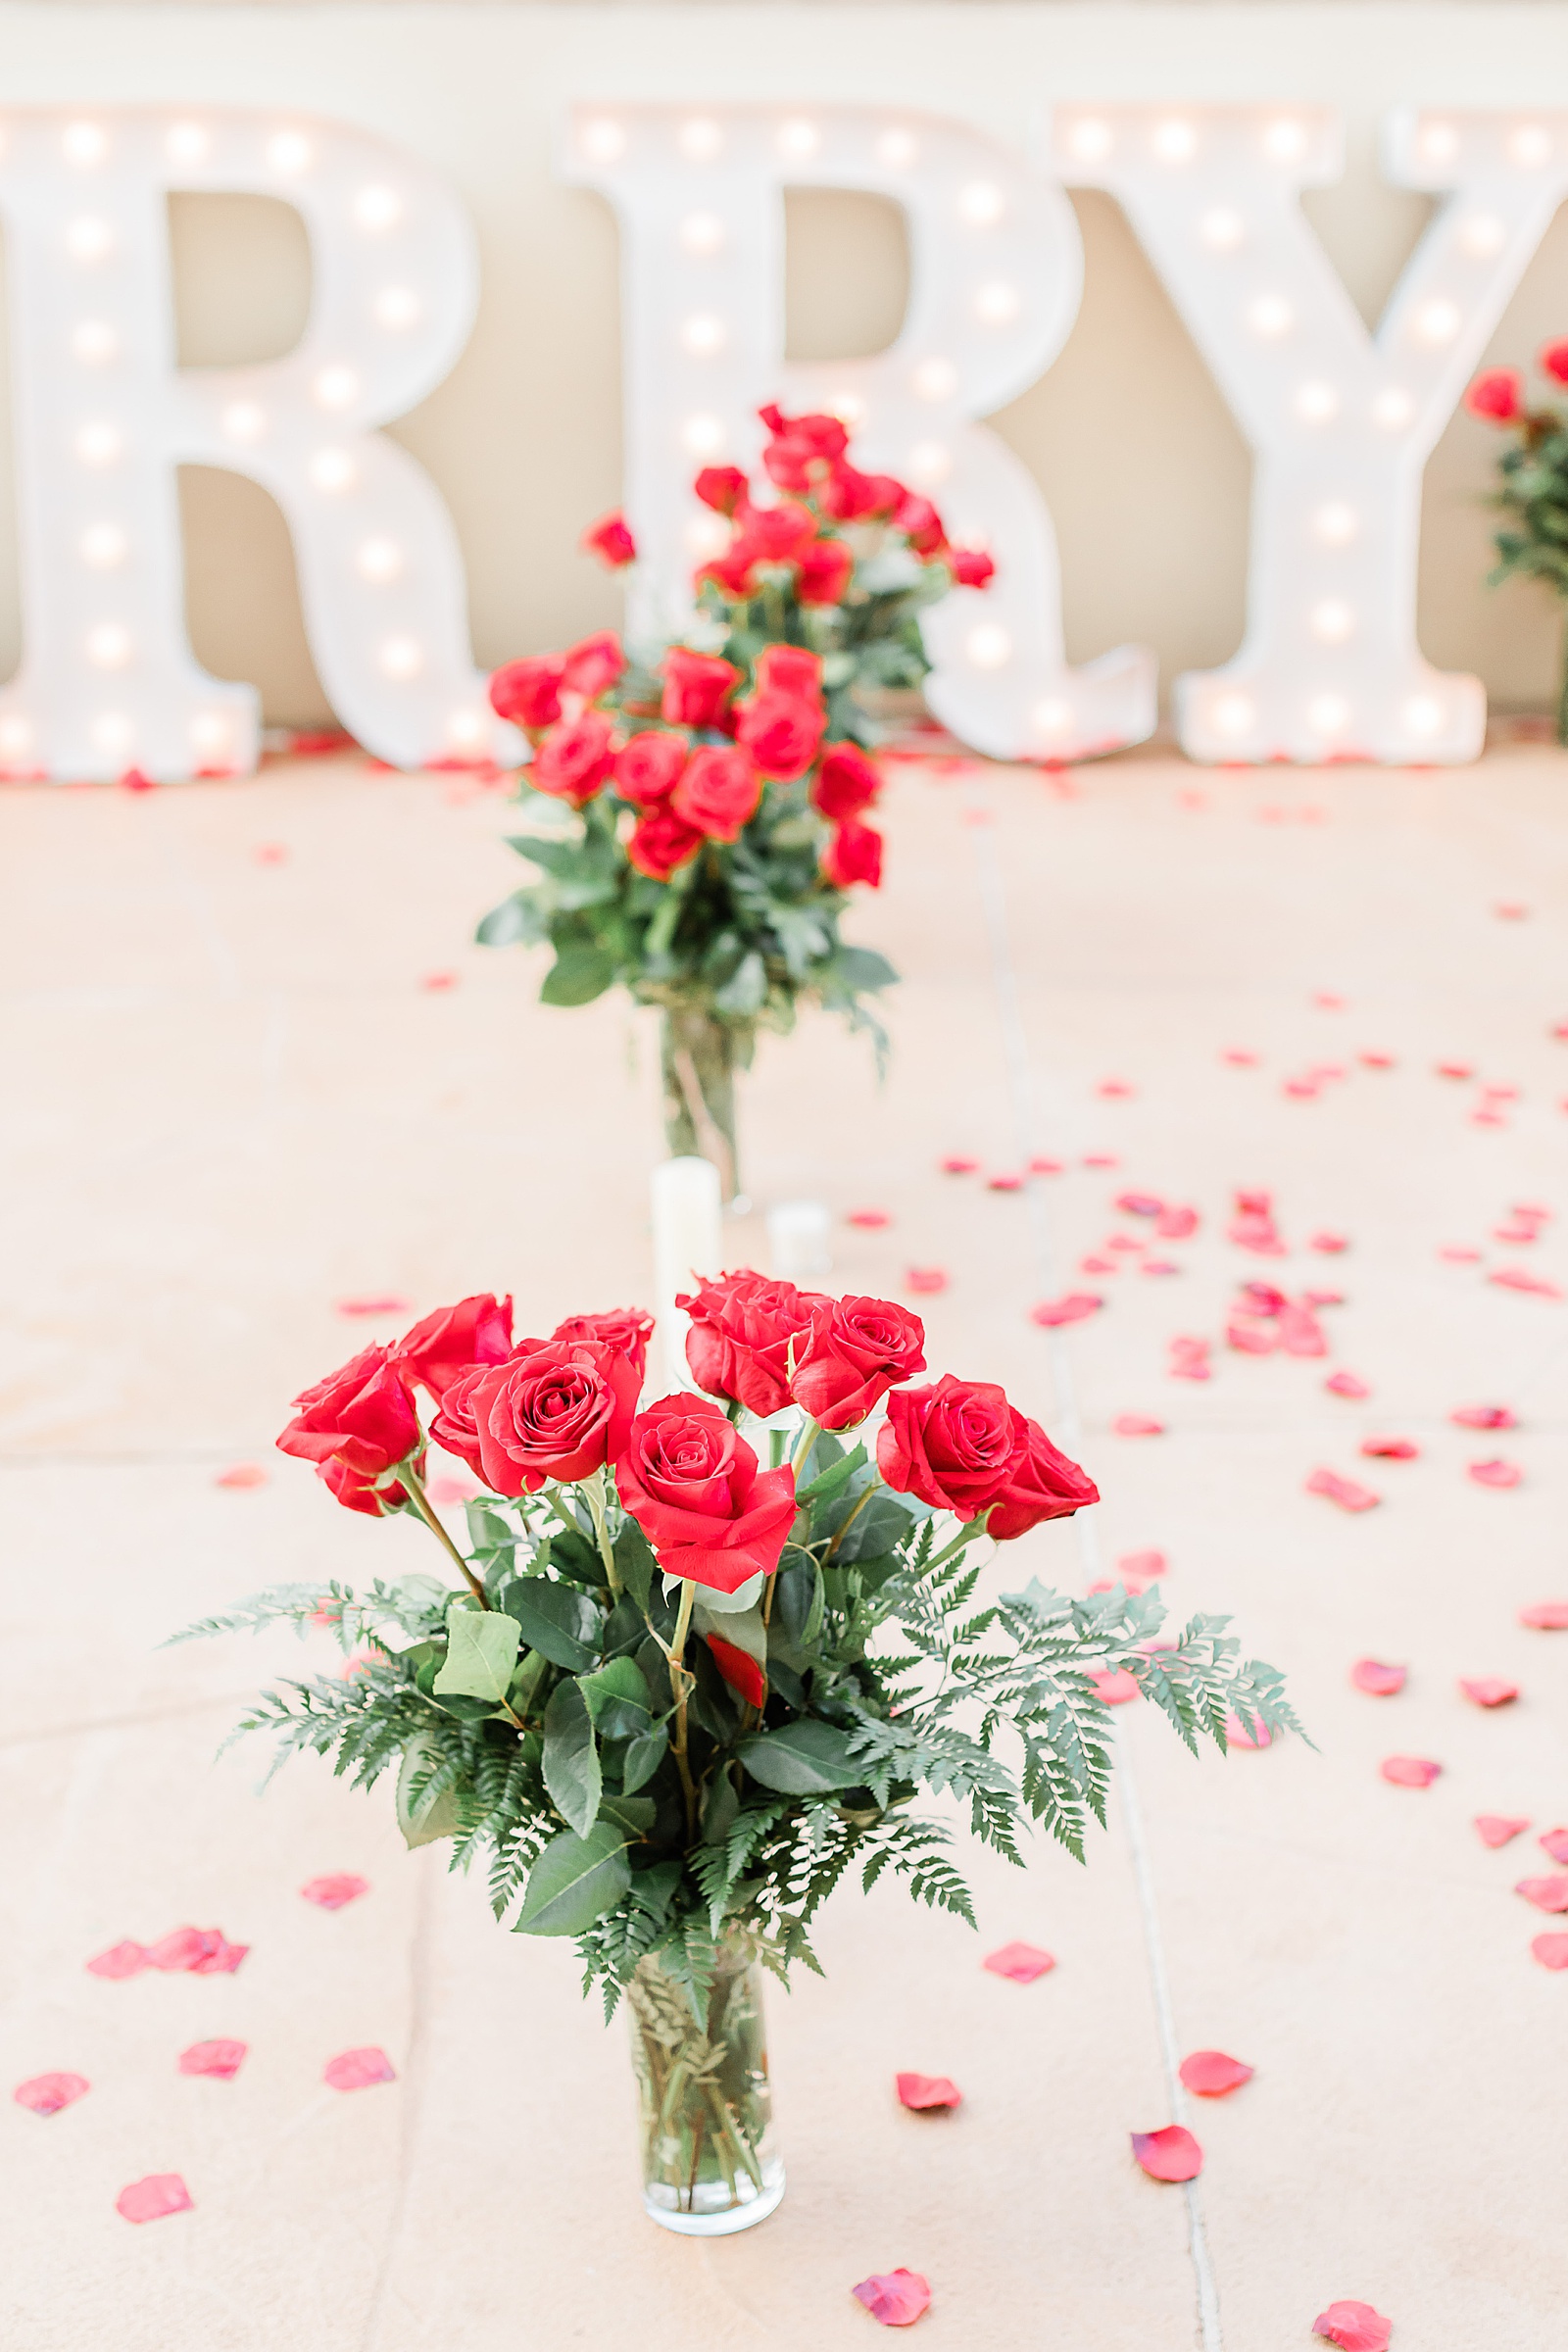 Rose Pathway for Proposal, Anna Kay Photography